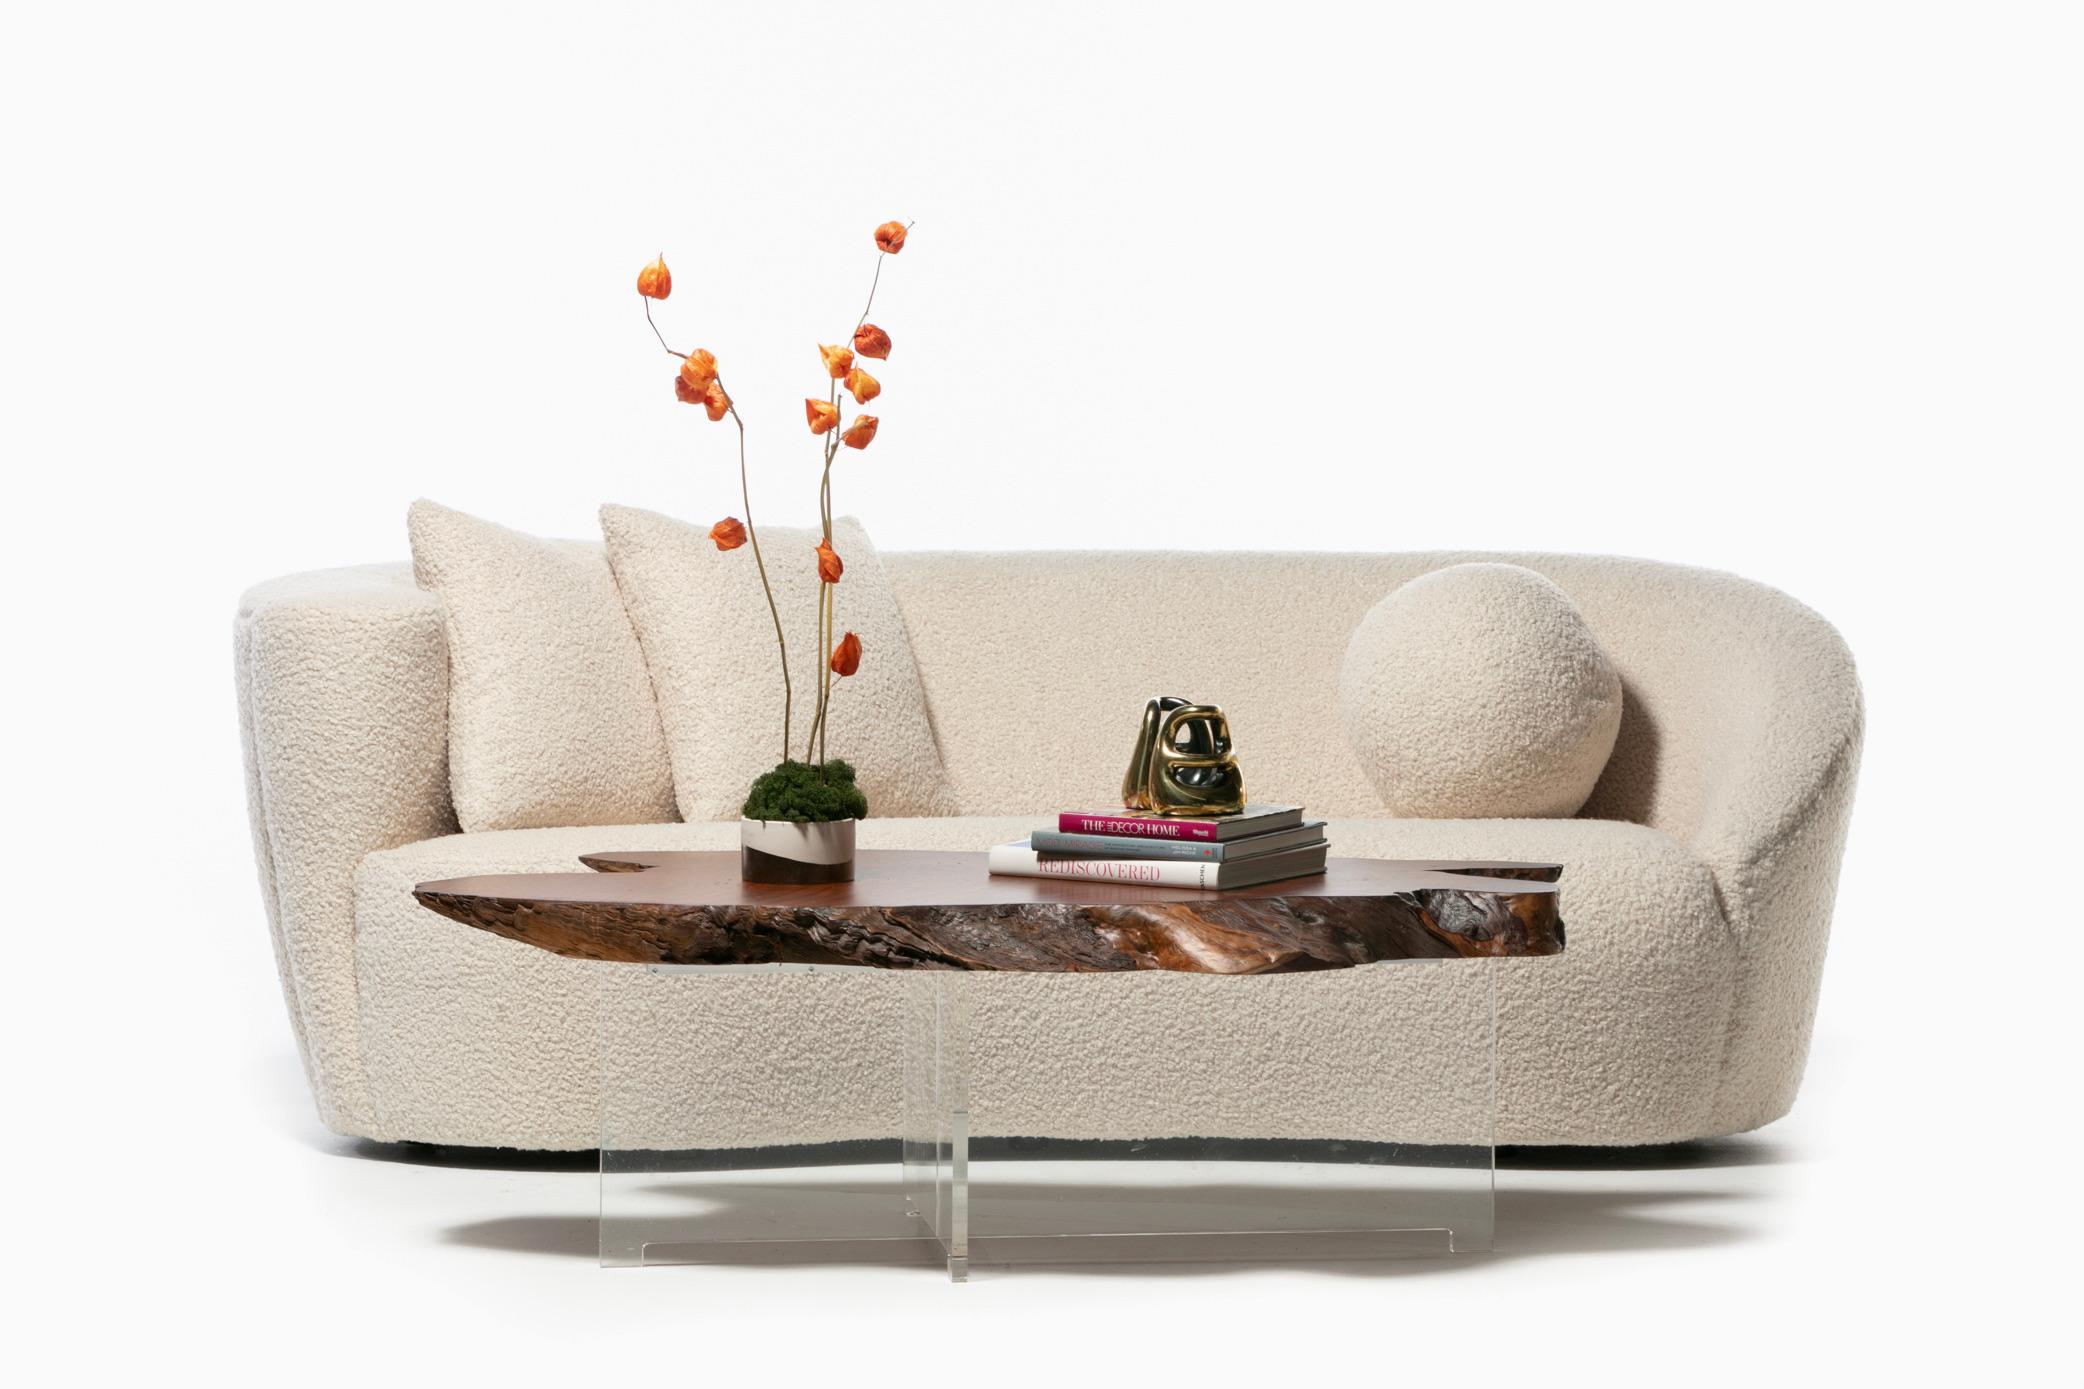 Post-Modern Vladimir Kagan Nautilus Sofa in Ivory White Bouclé by Directional, c. 1990 For Sale